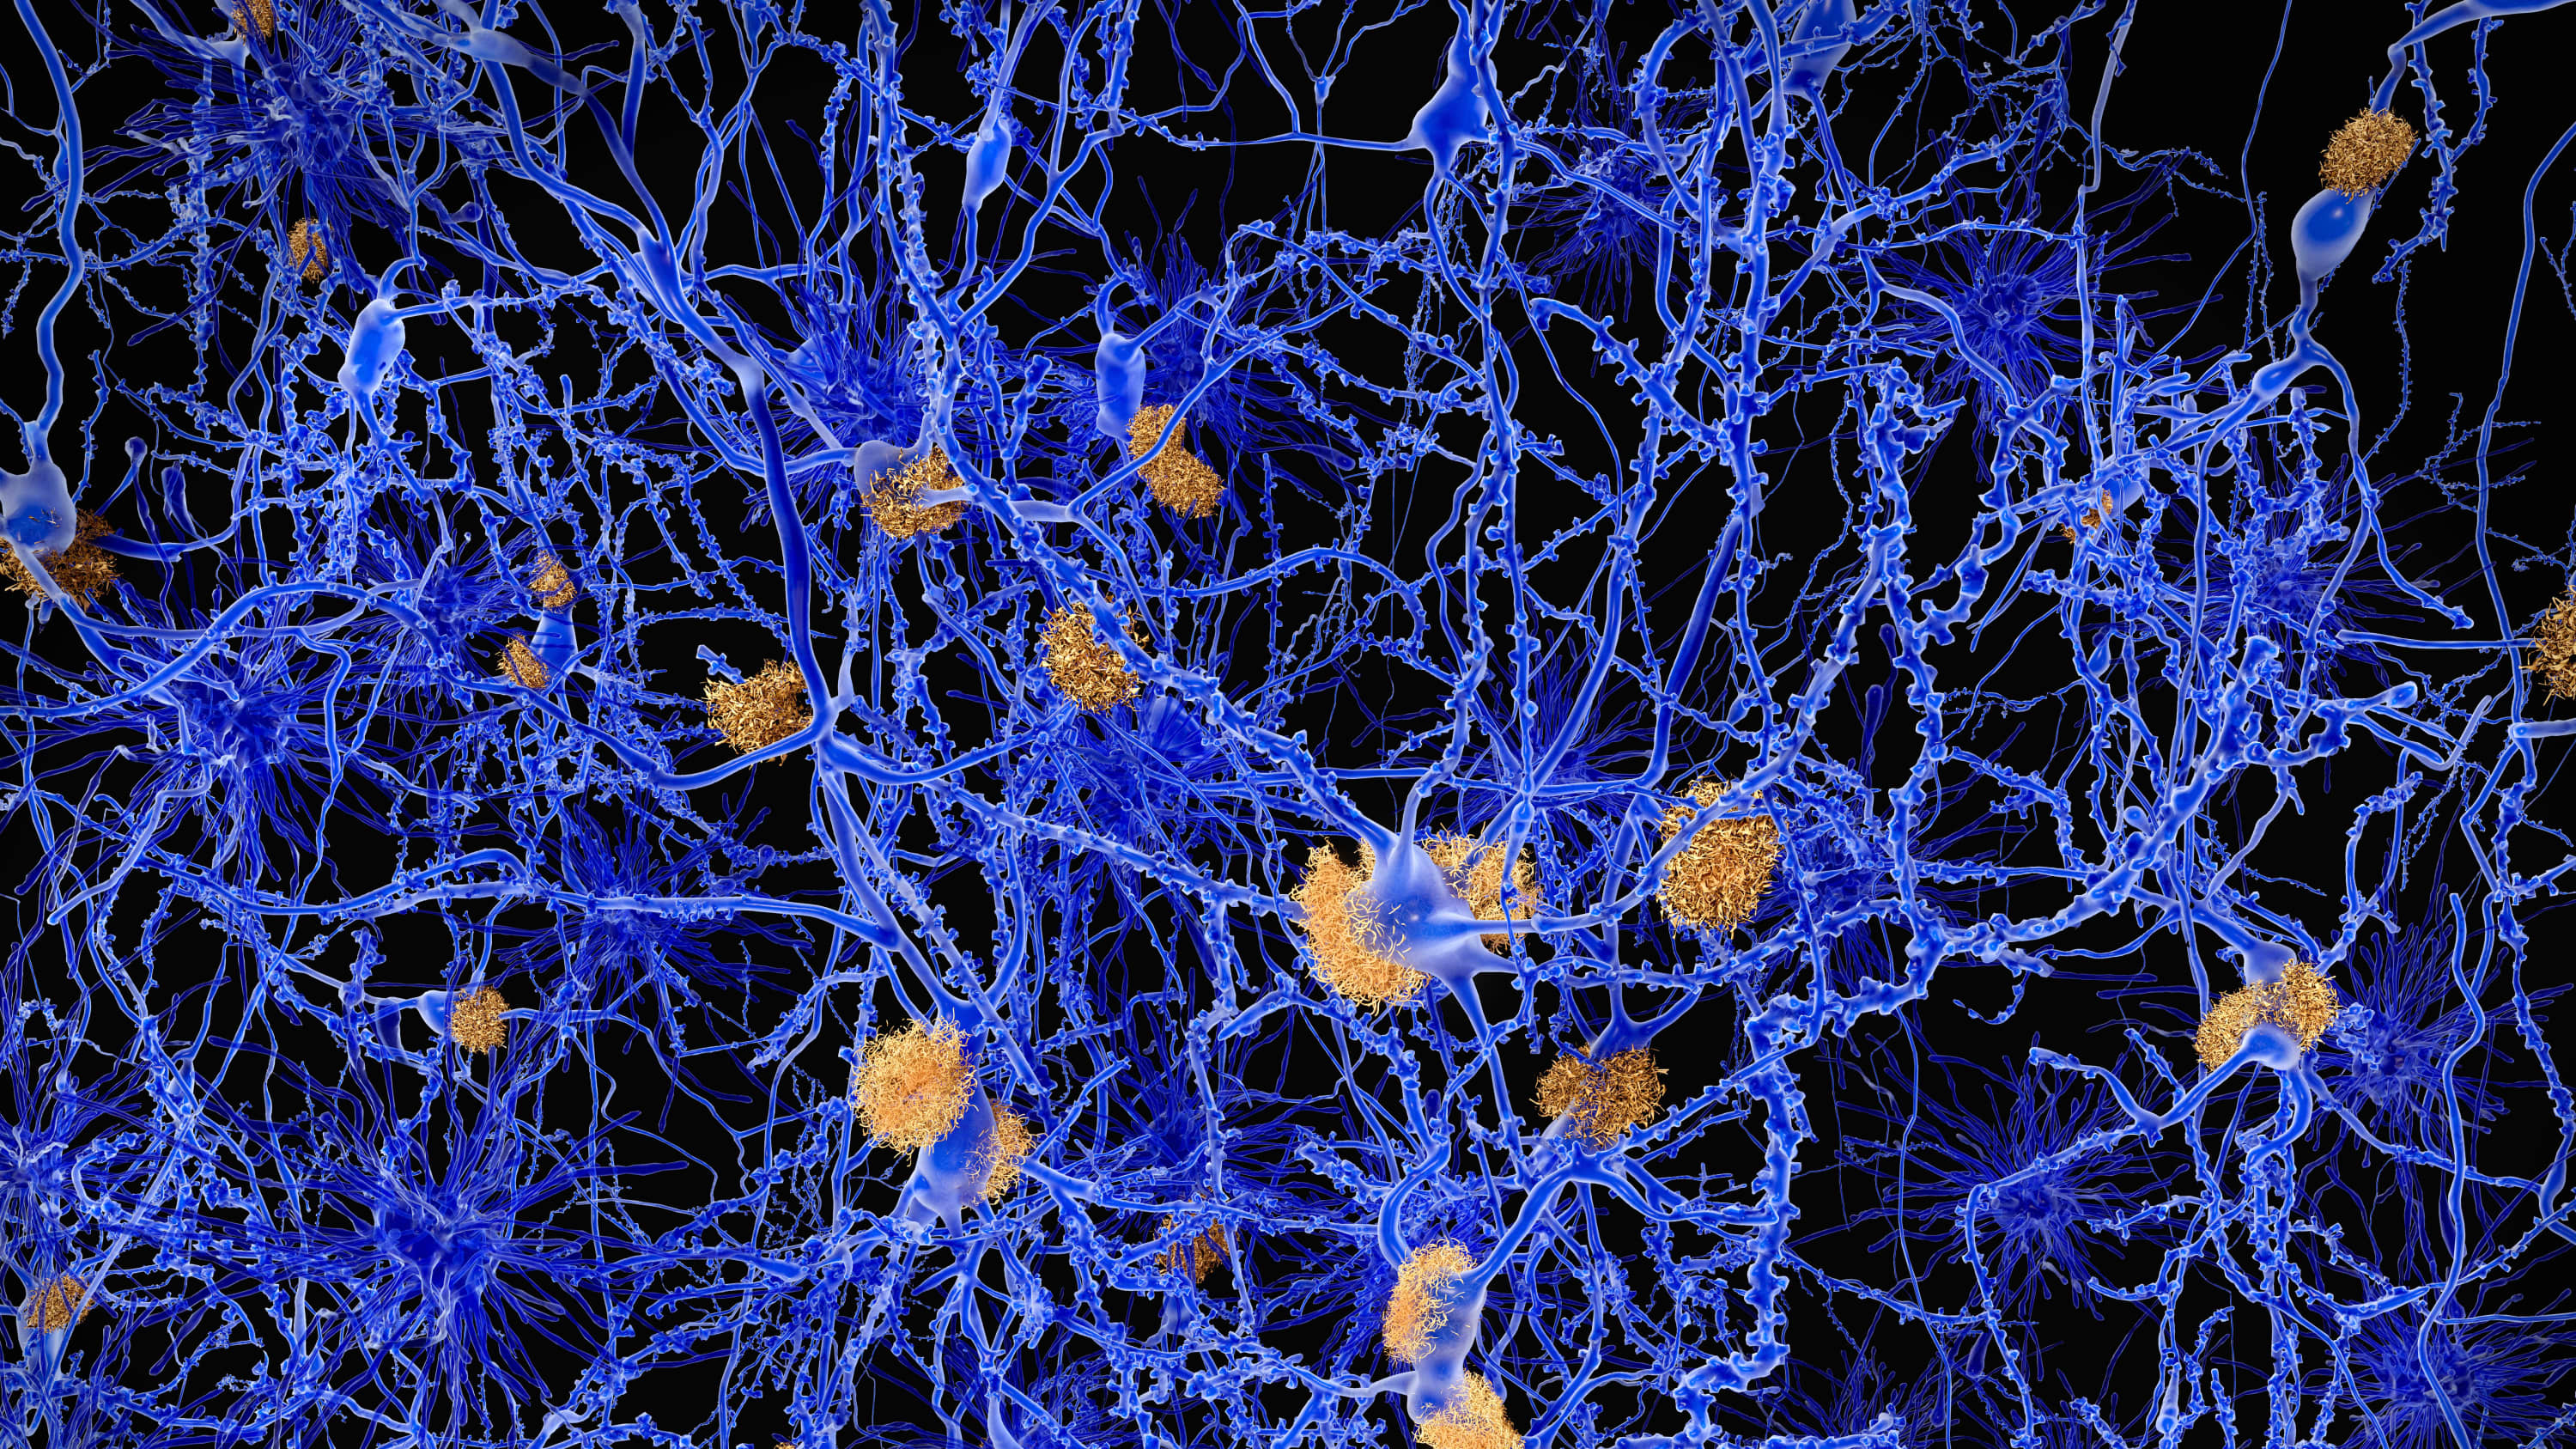 Illustration of amyloid plaques, the characteristic feature of Alzheimer’s disease, among neurons.